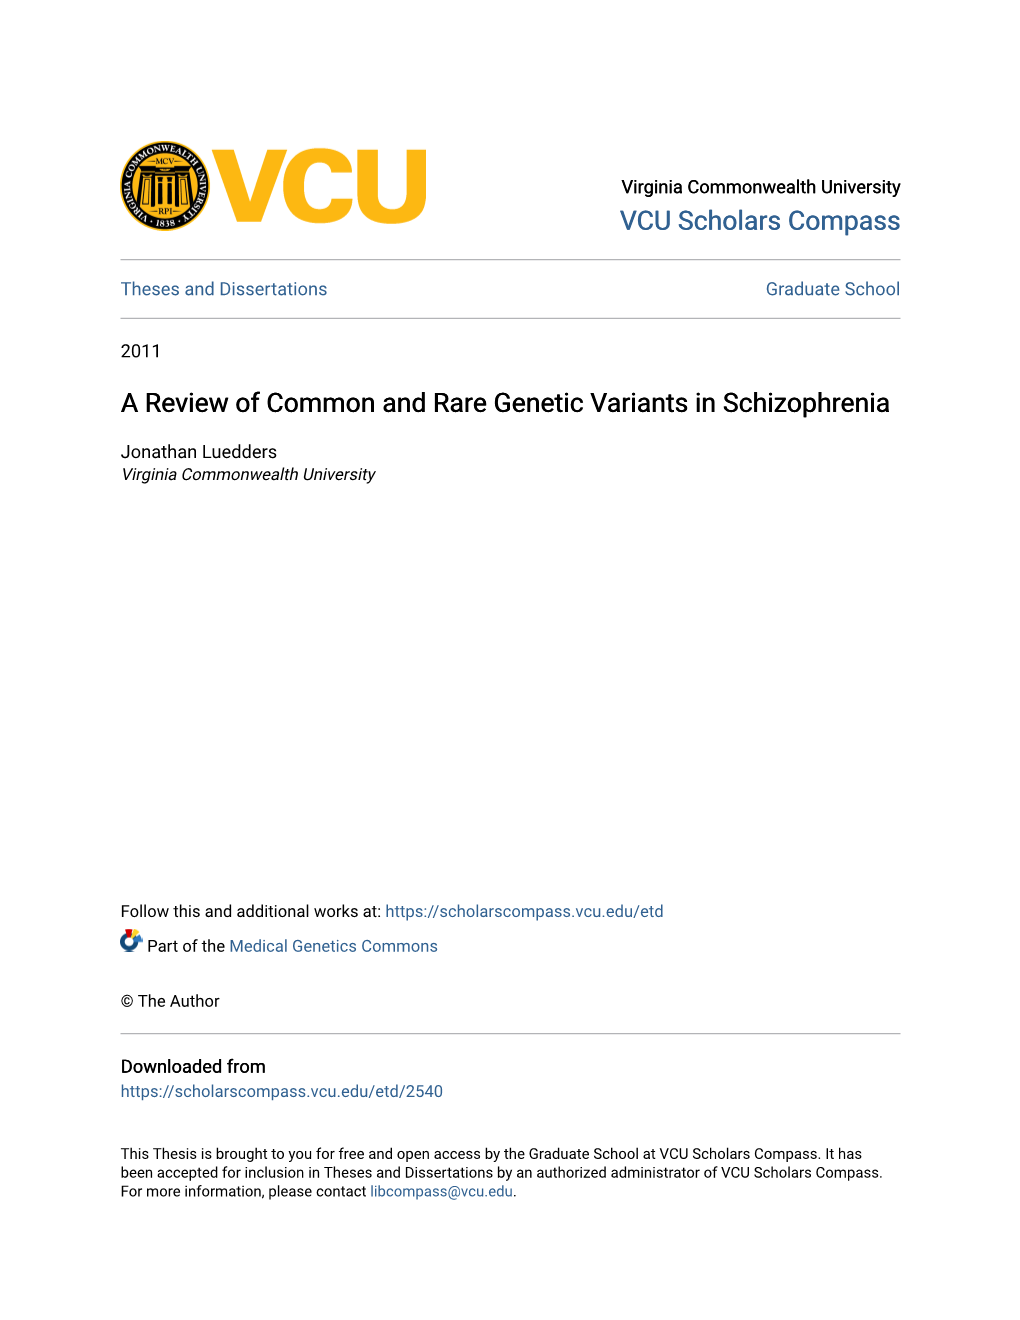 A Review of Common and Rare Genetic Variants in Schizophrenia